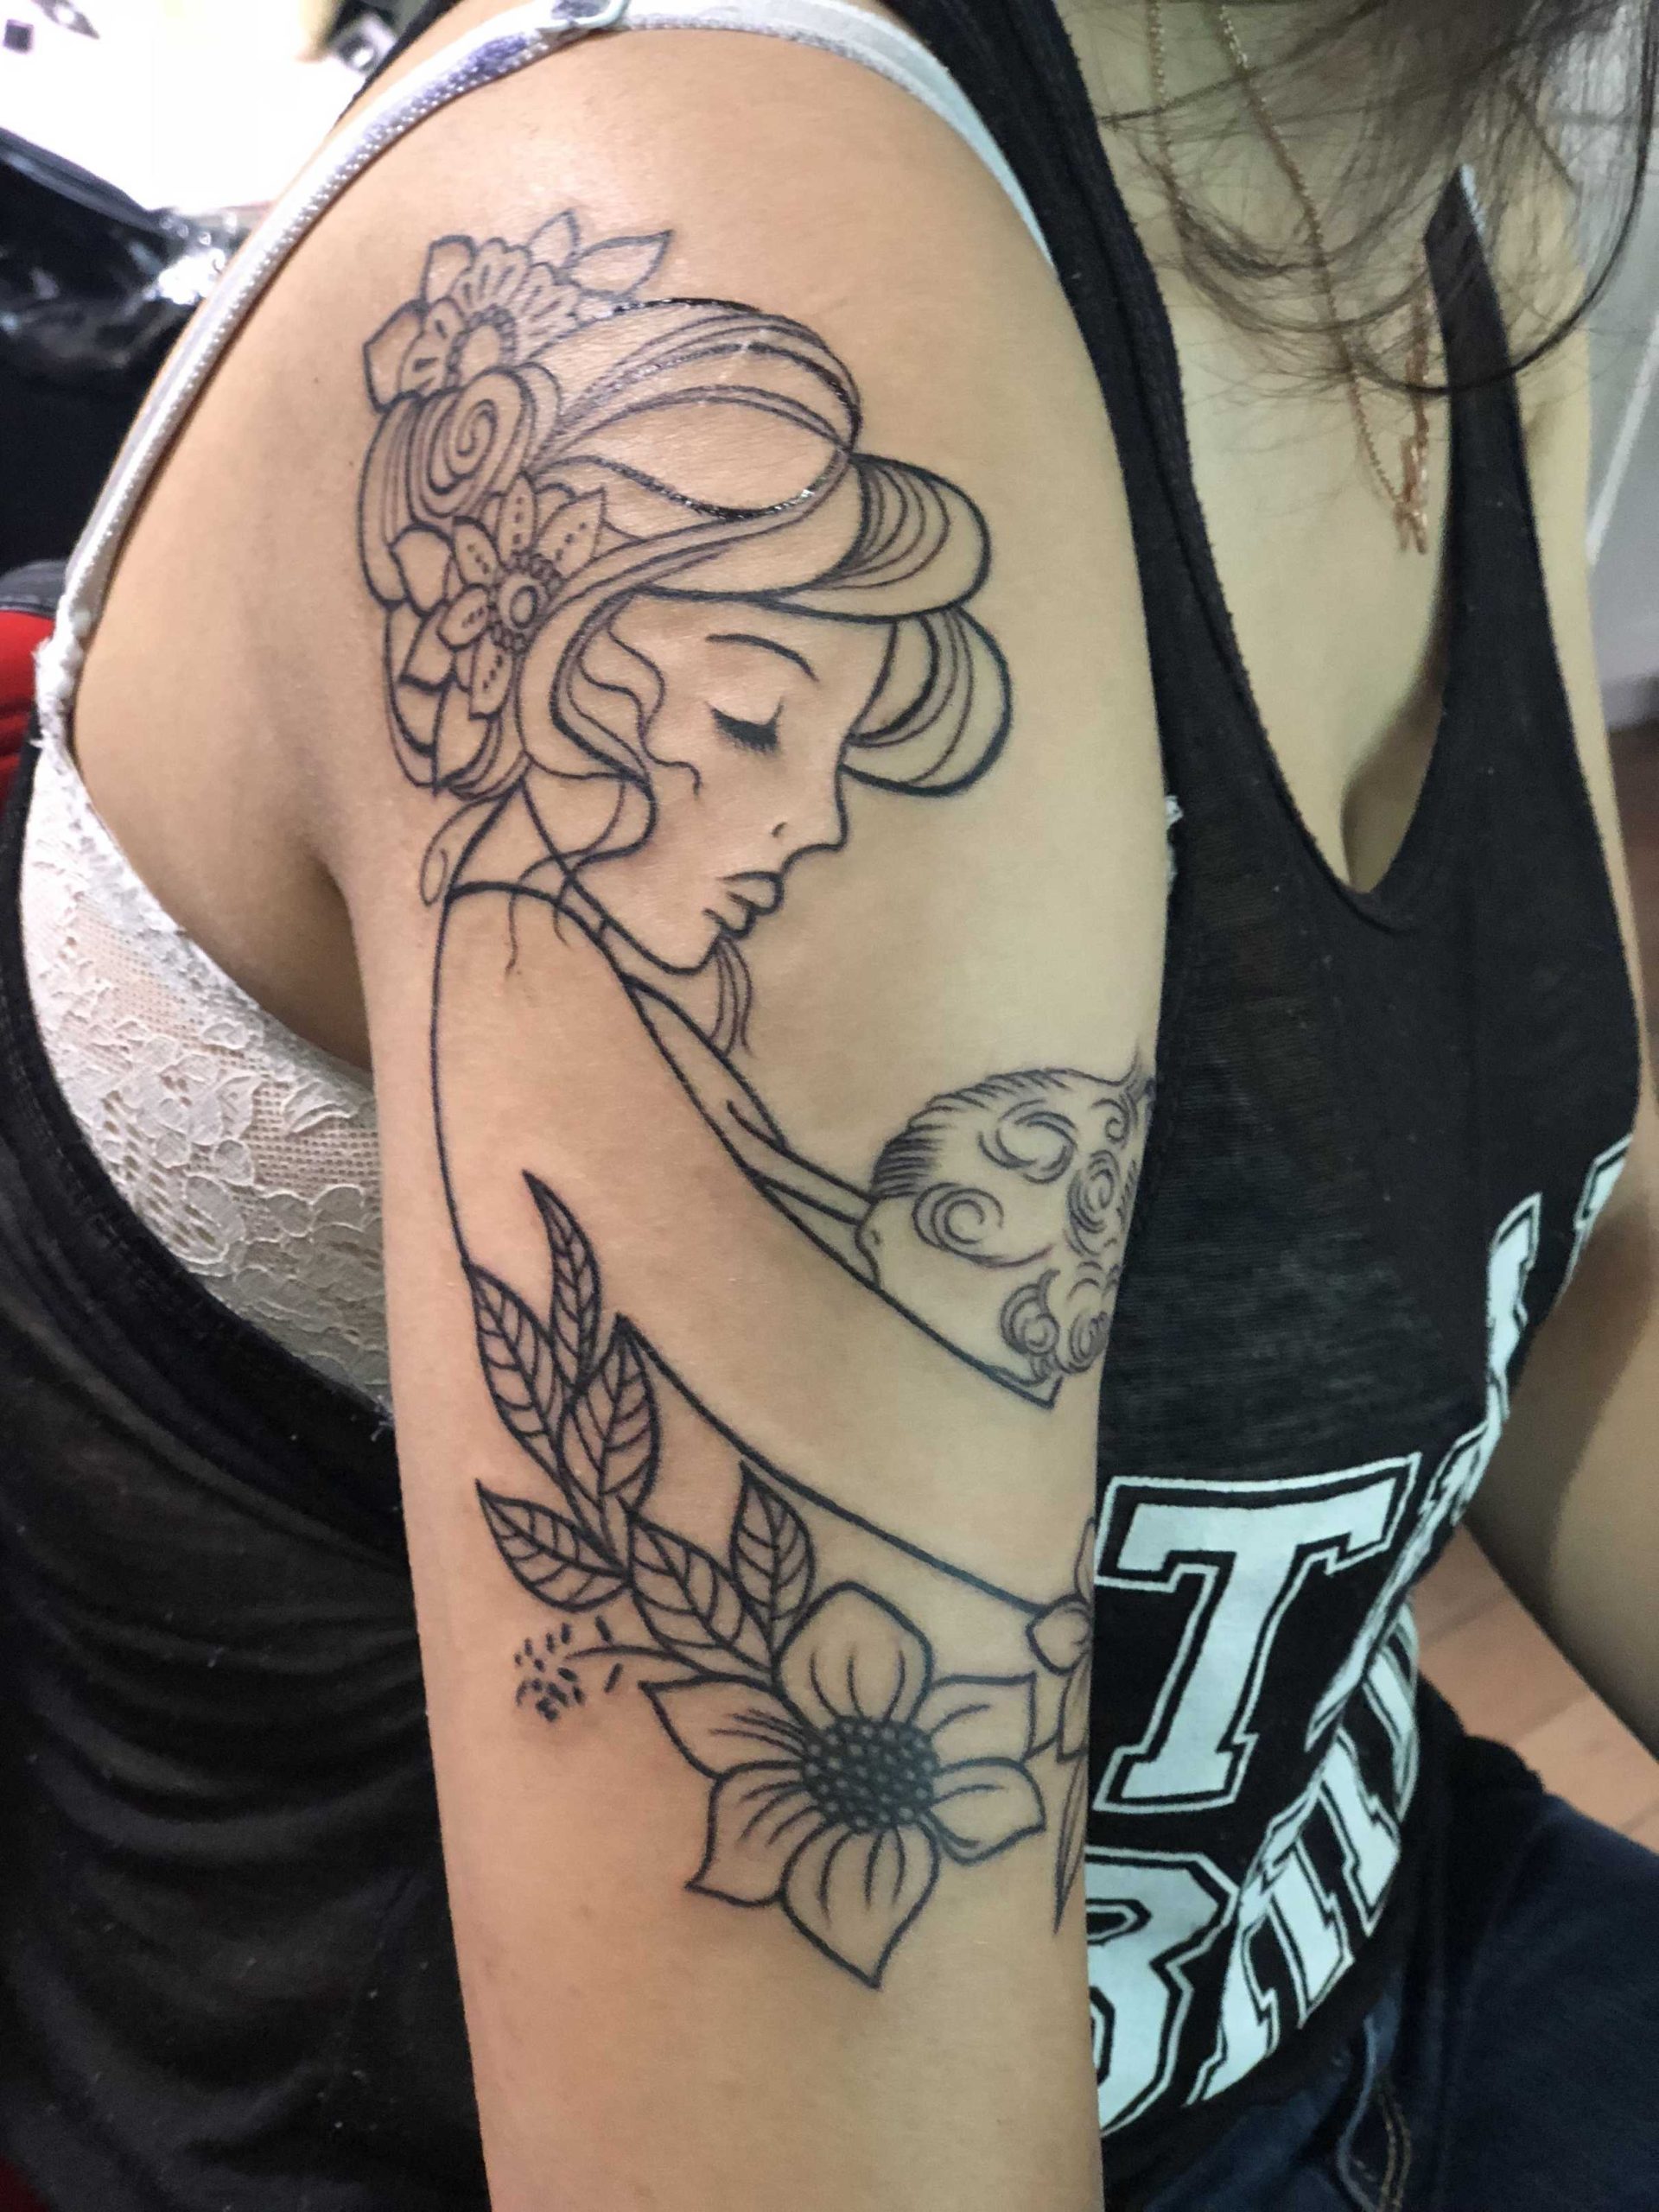 Breastfeeding Tattoo for my daughter Charlotte Rose